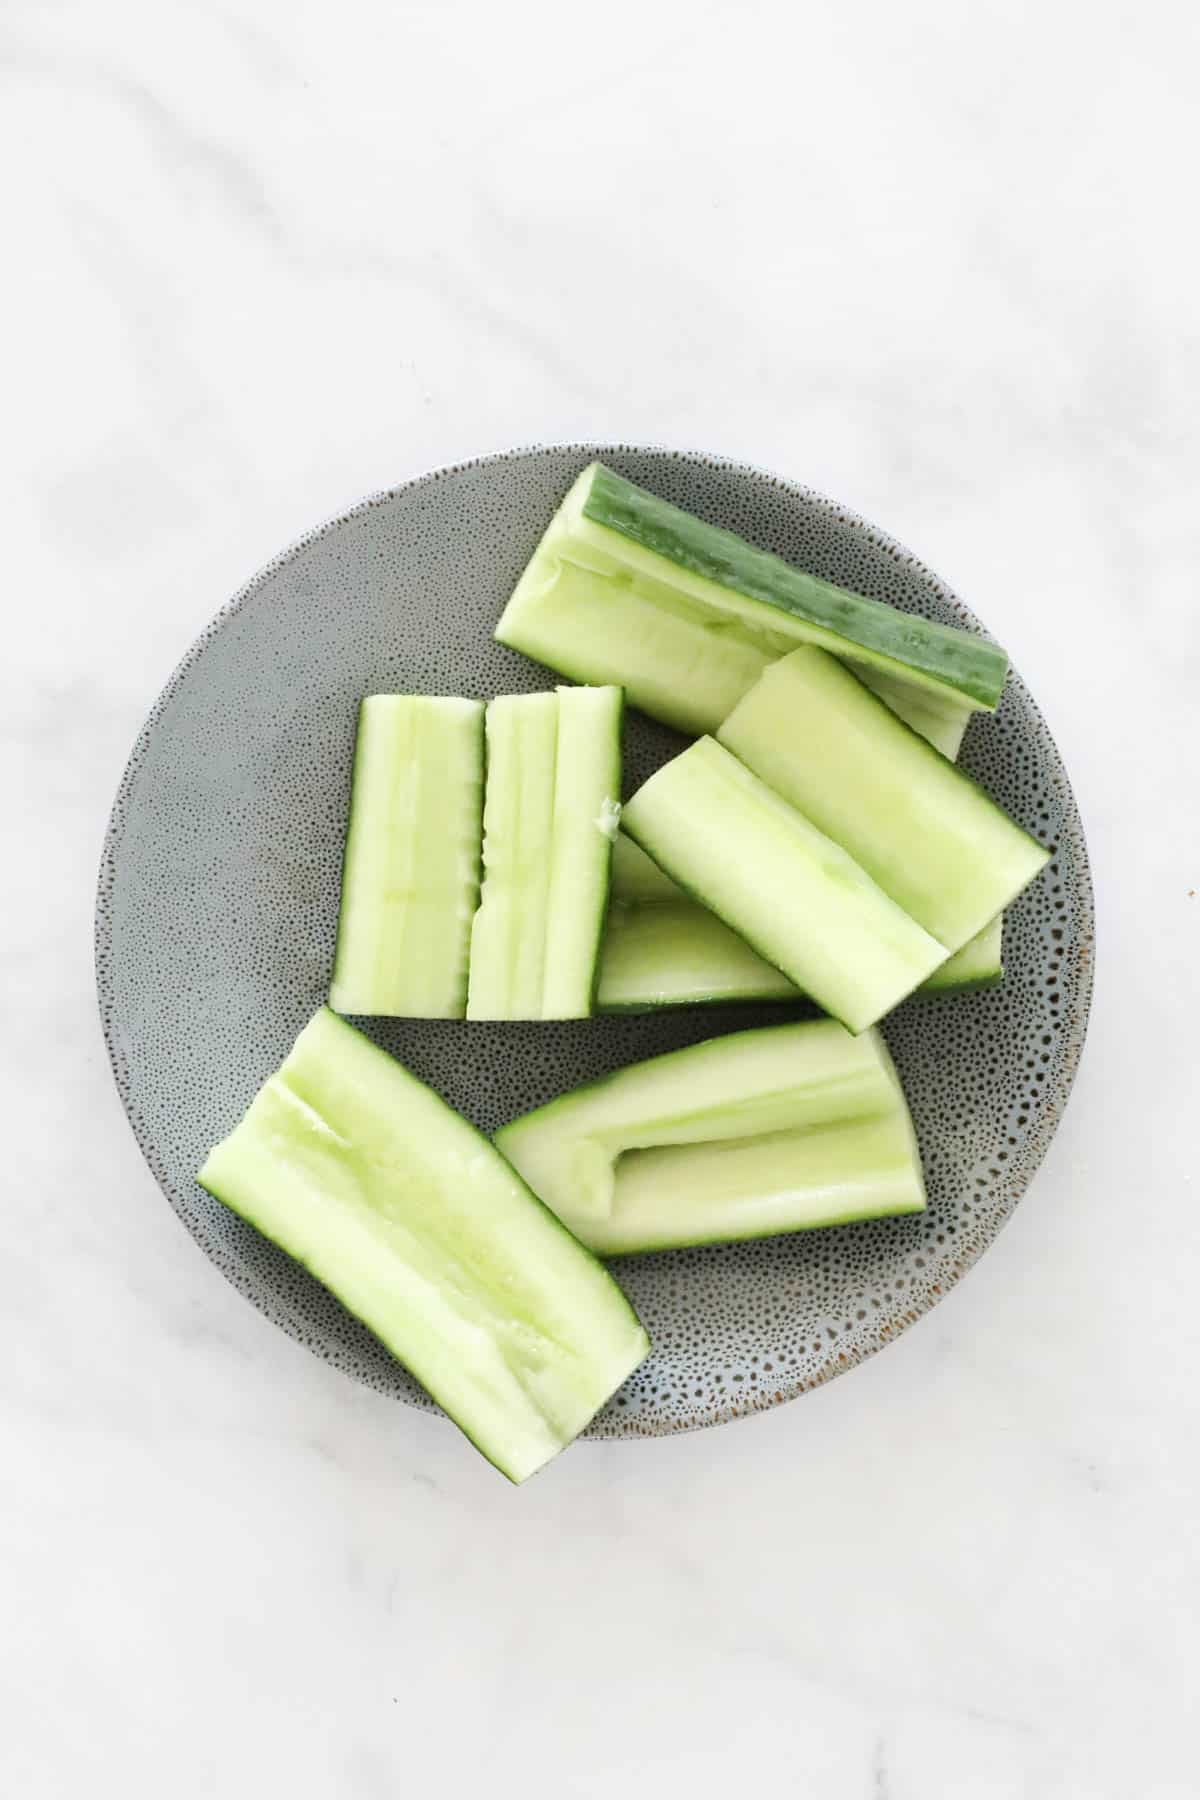 Sliced cucumber on a plate.